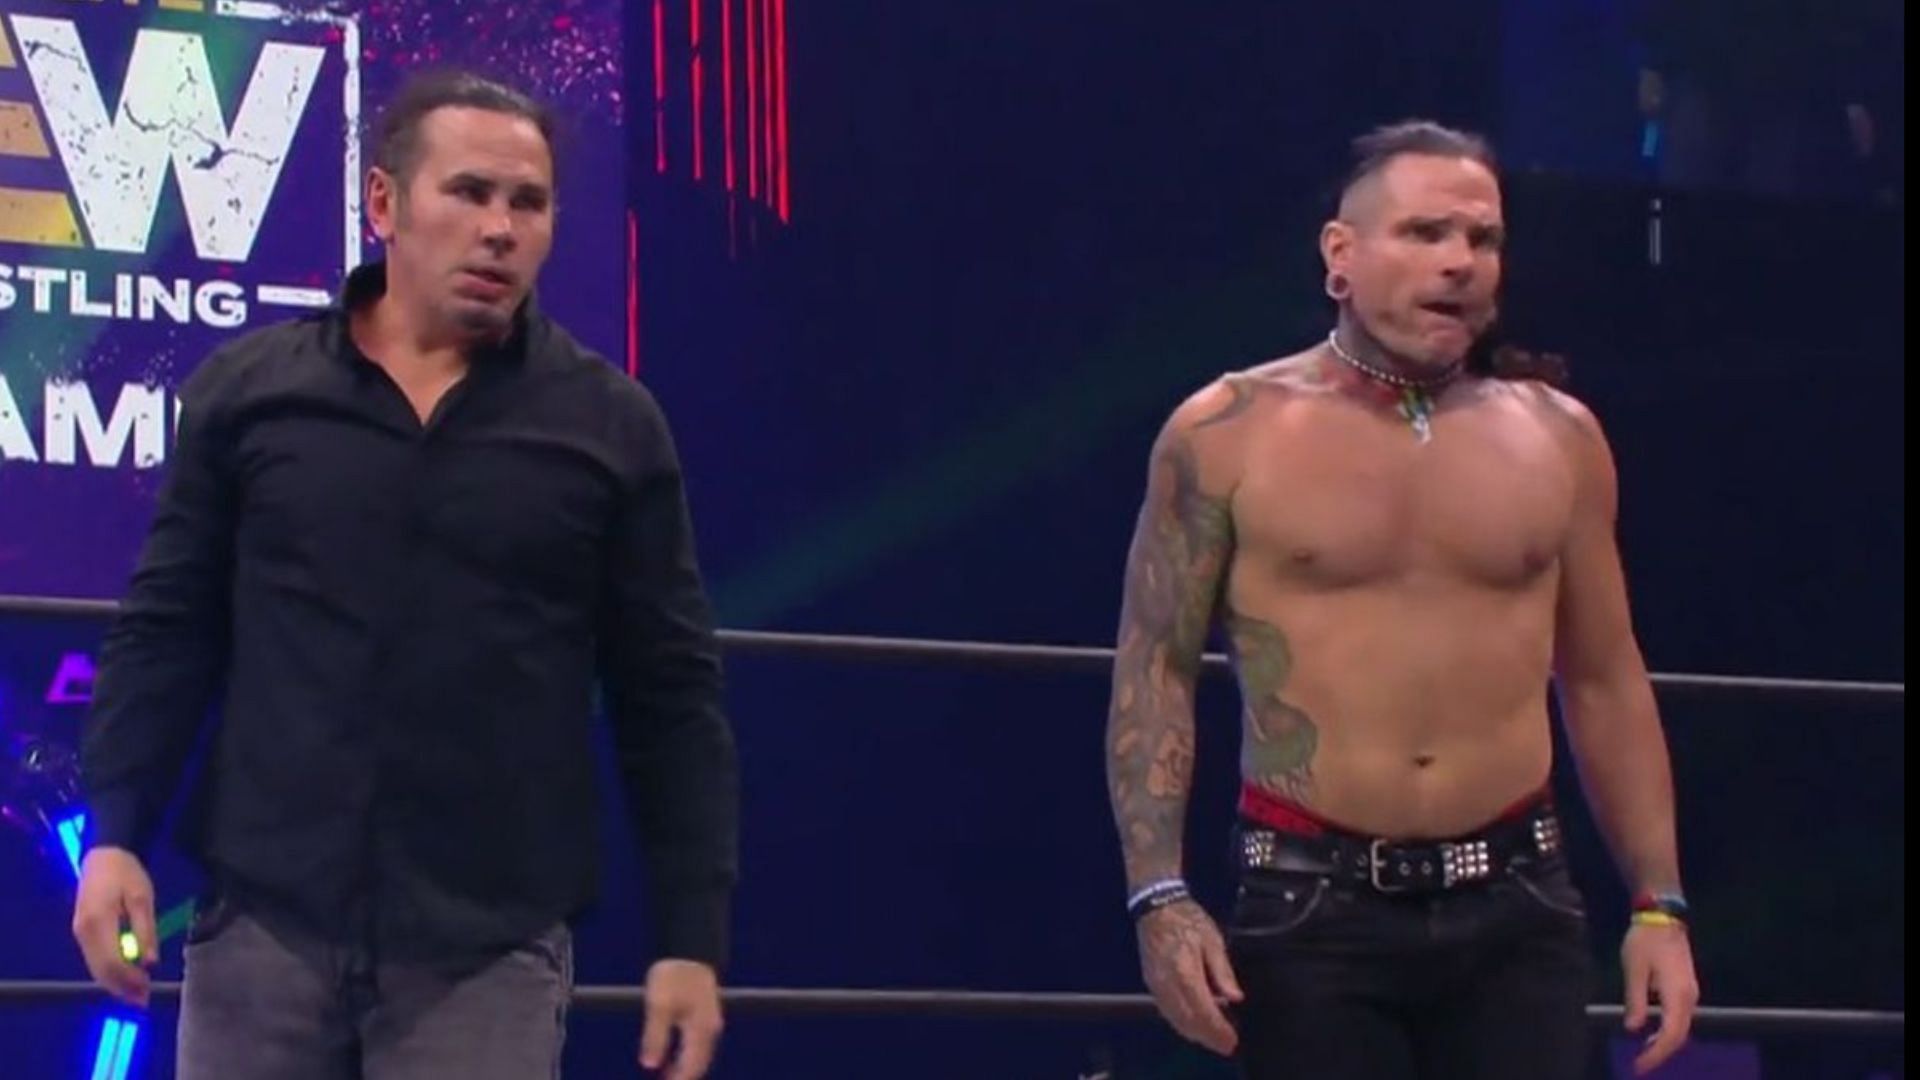 The Hardy Boyz have lost another match tonight on Rampage